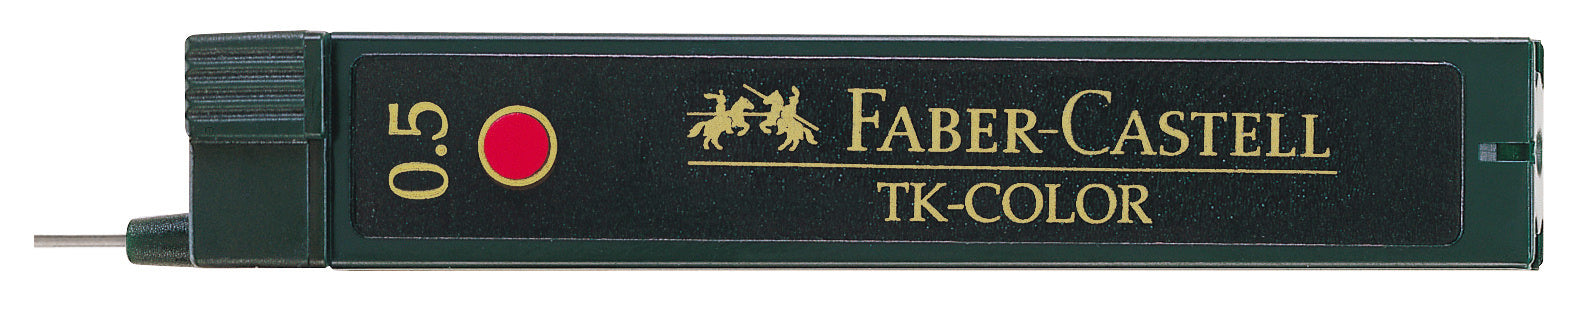 Faber-castell TK-Colour Leads 0.5 mm